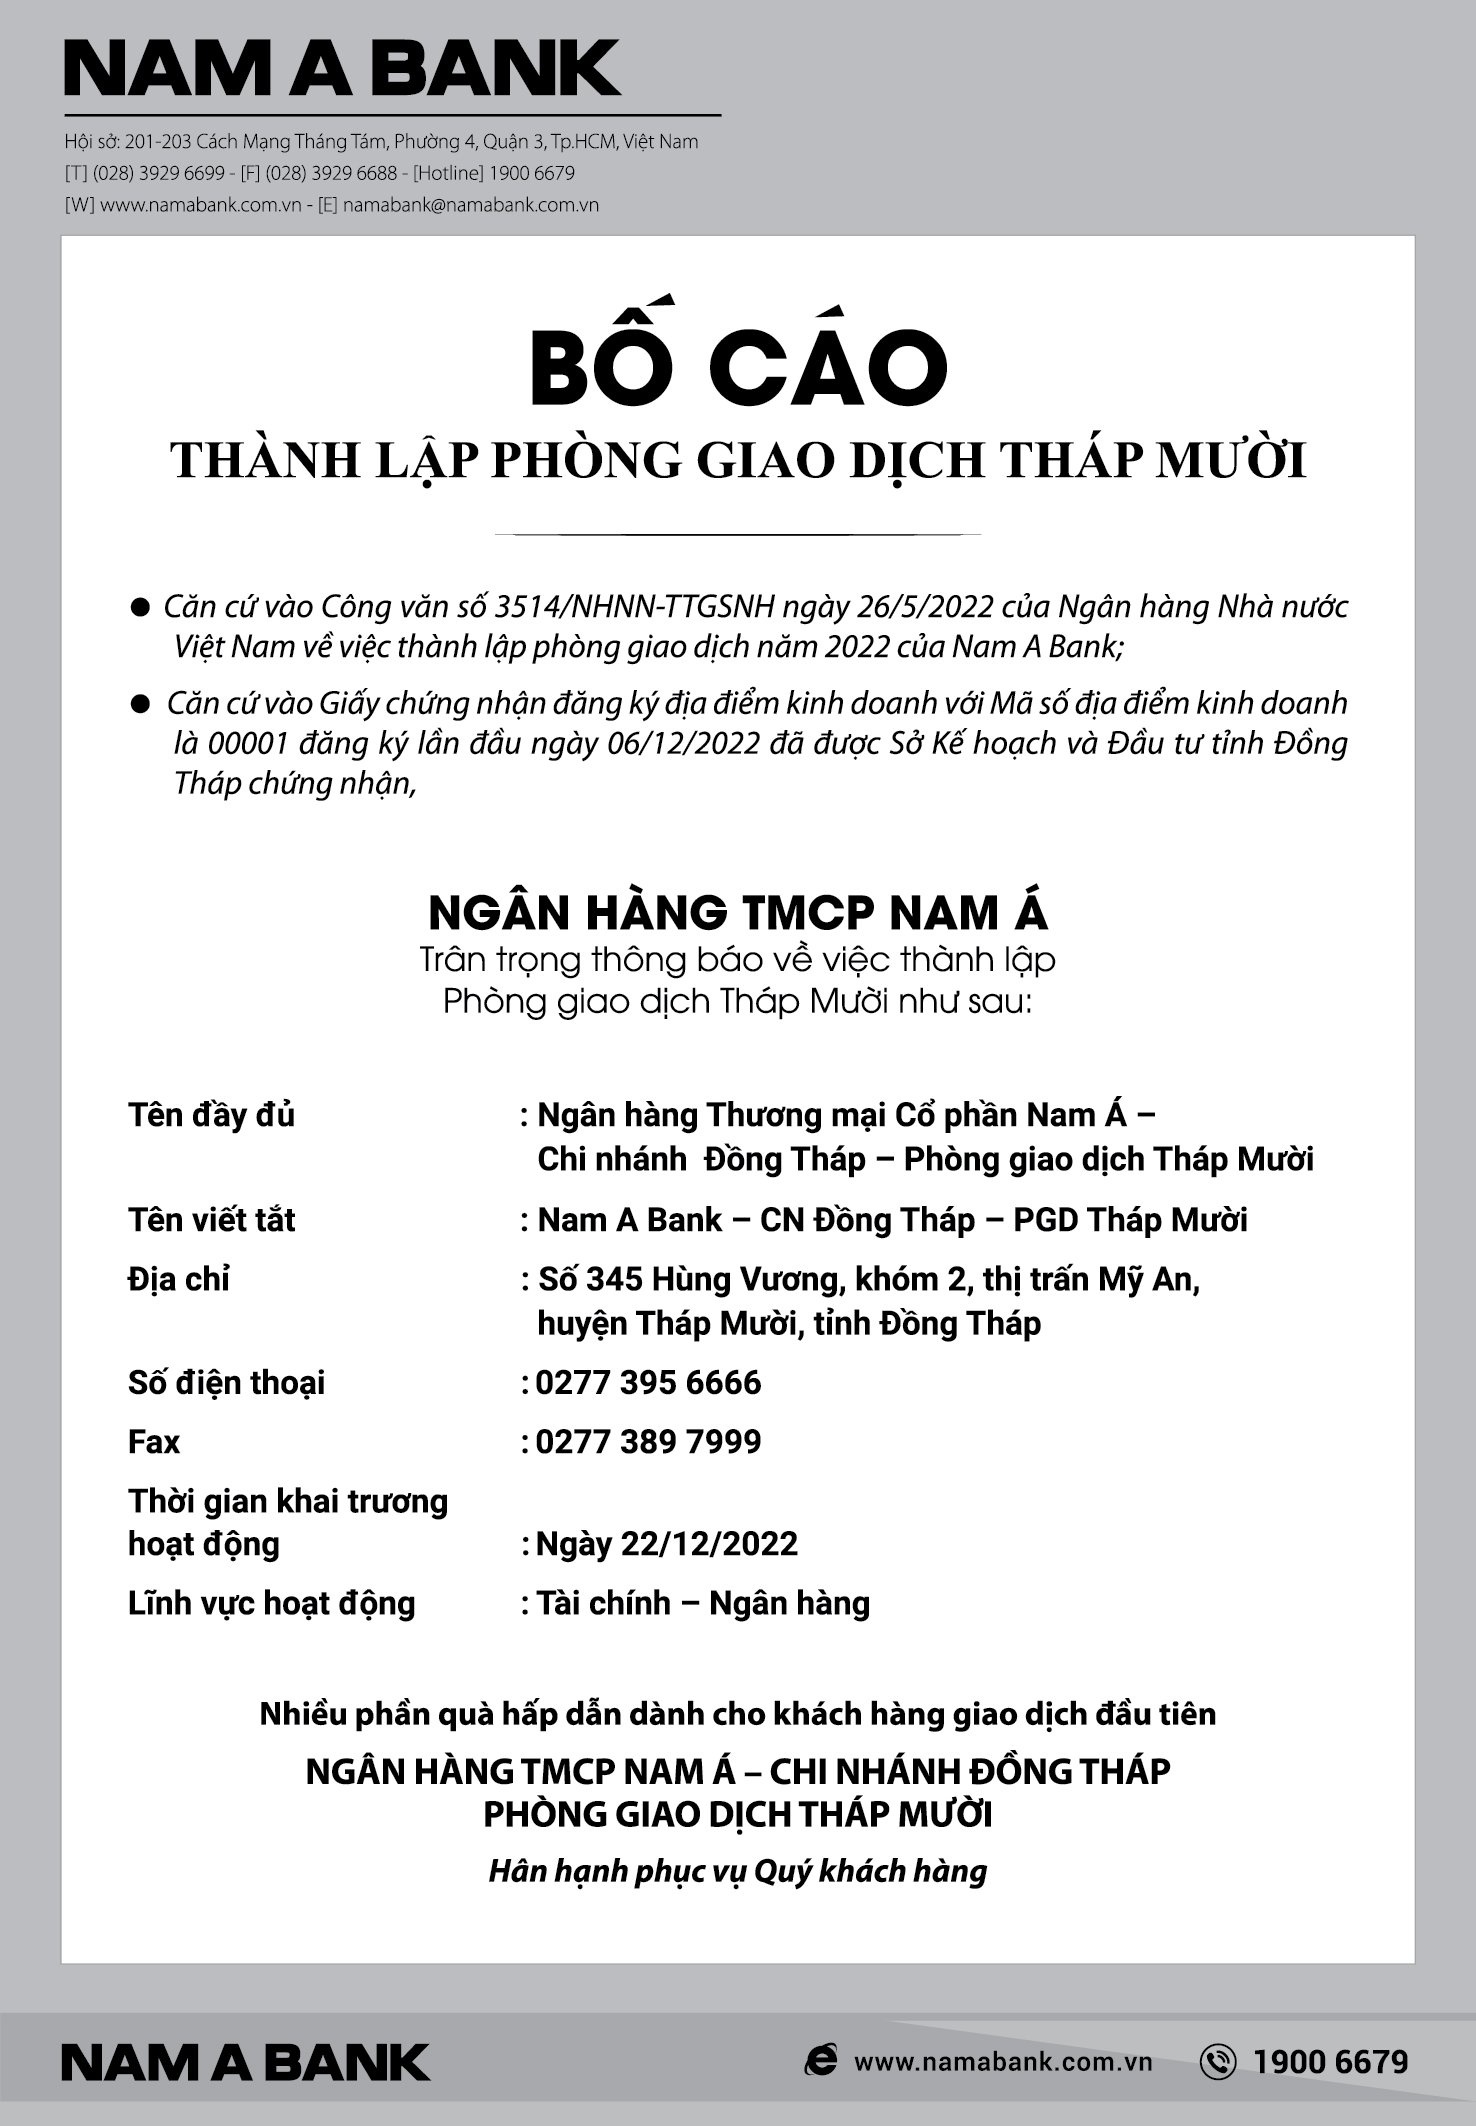 nam a bank bo cao thanh lap phong giao dich thap muoi 134463